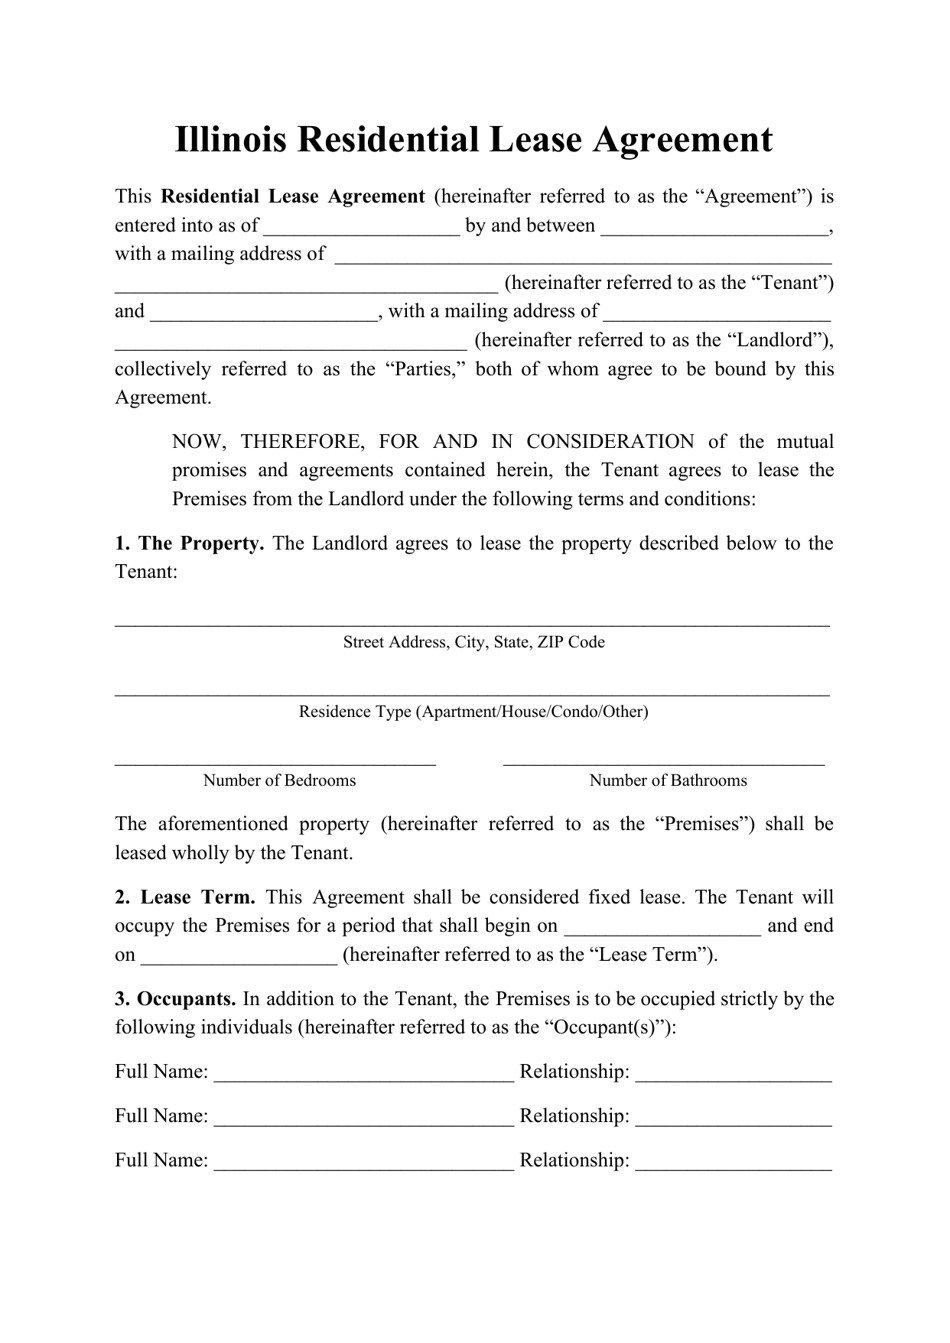 illinois-residential-lease-agreement-template-download-printable-pdf